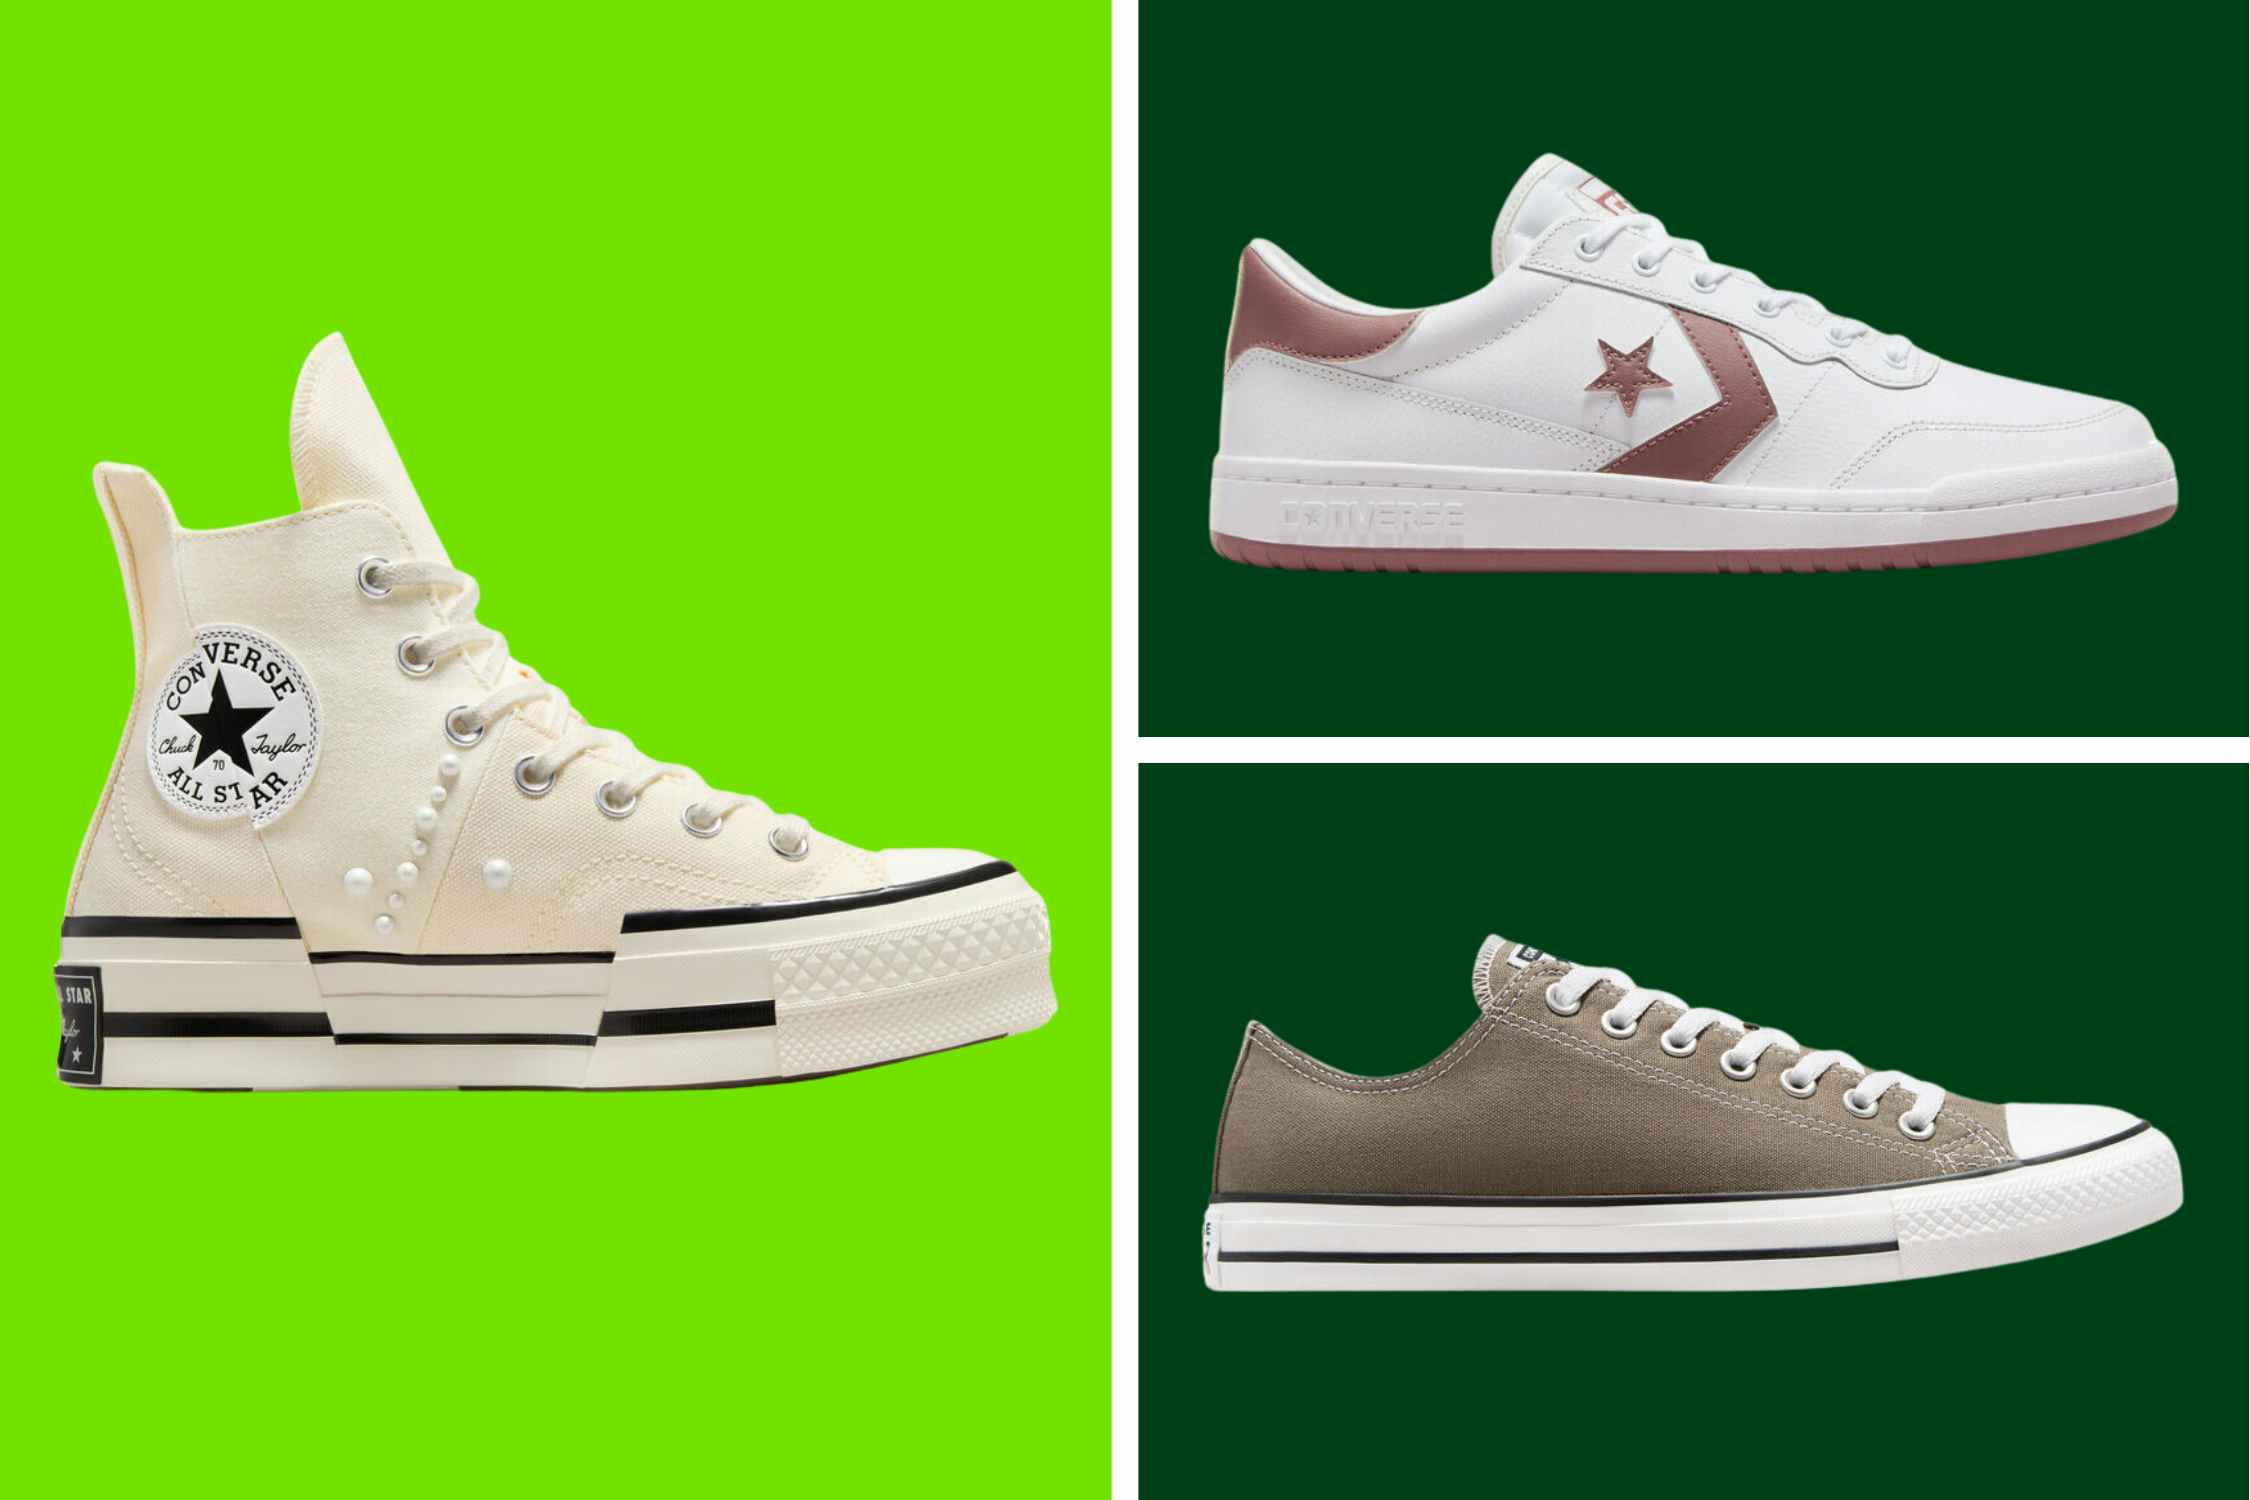 Converse Shoe Sale: Kids' Styles for $18 and Adult Sneakers Starting at $27